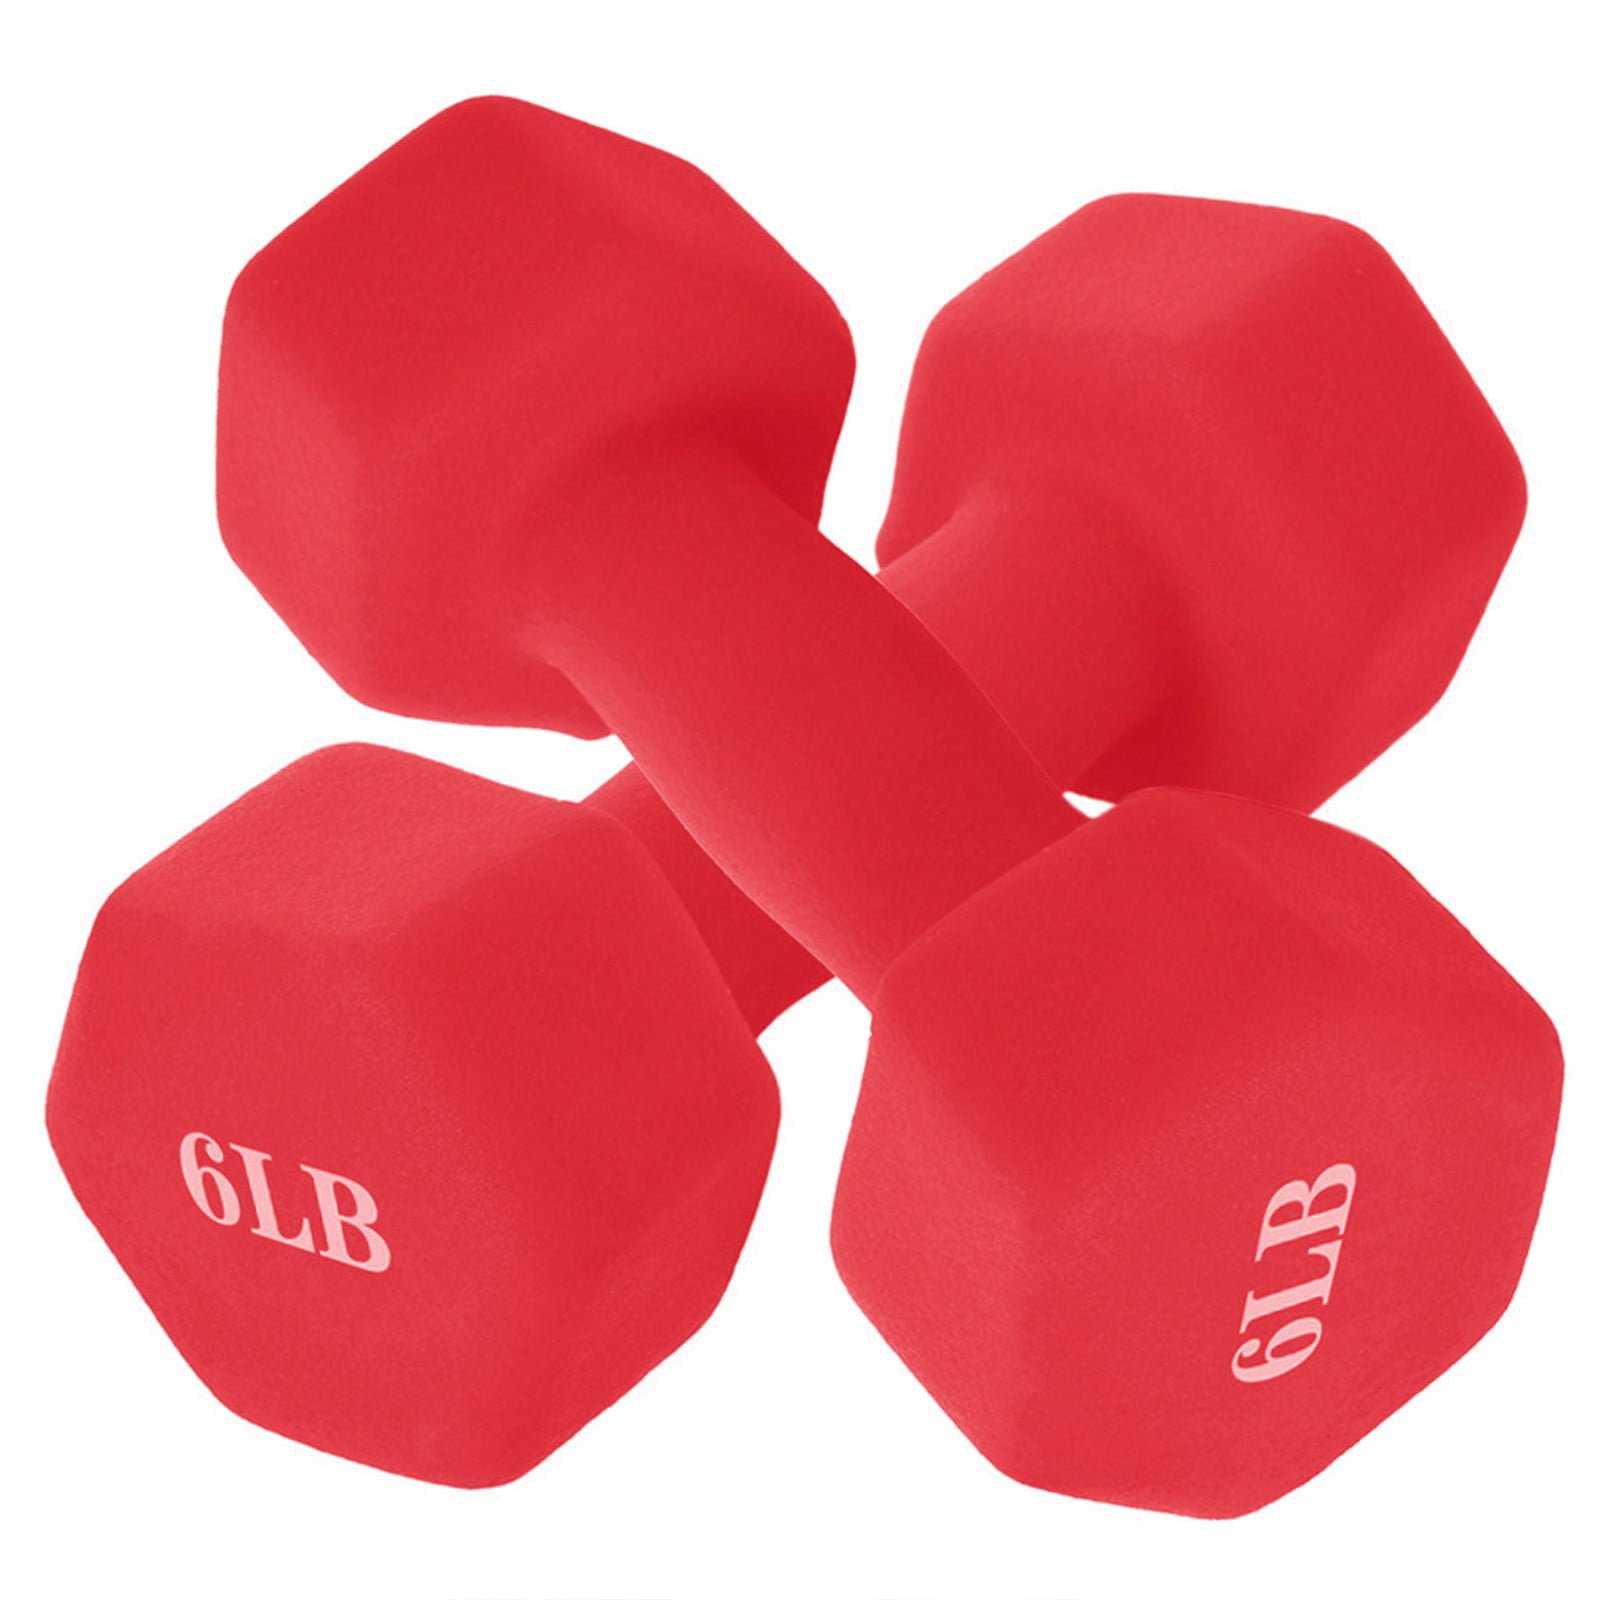 Youth A Pair Hexagon Neoprene Coated Dumbbell Comfortable Contoured Grips Women Teens Deluxe Body Building/Sculpting Workout/Weight Loss for Both Men Neoprene Non Slip Grip Seniors